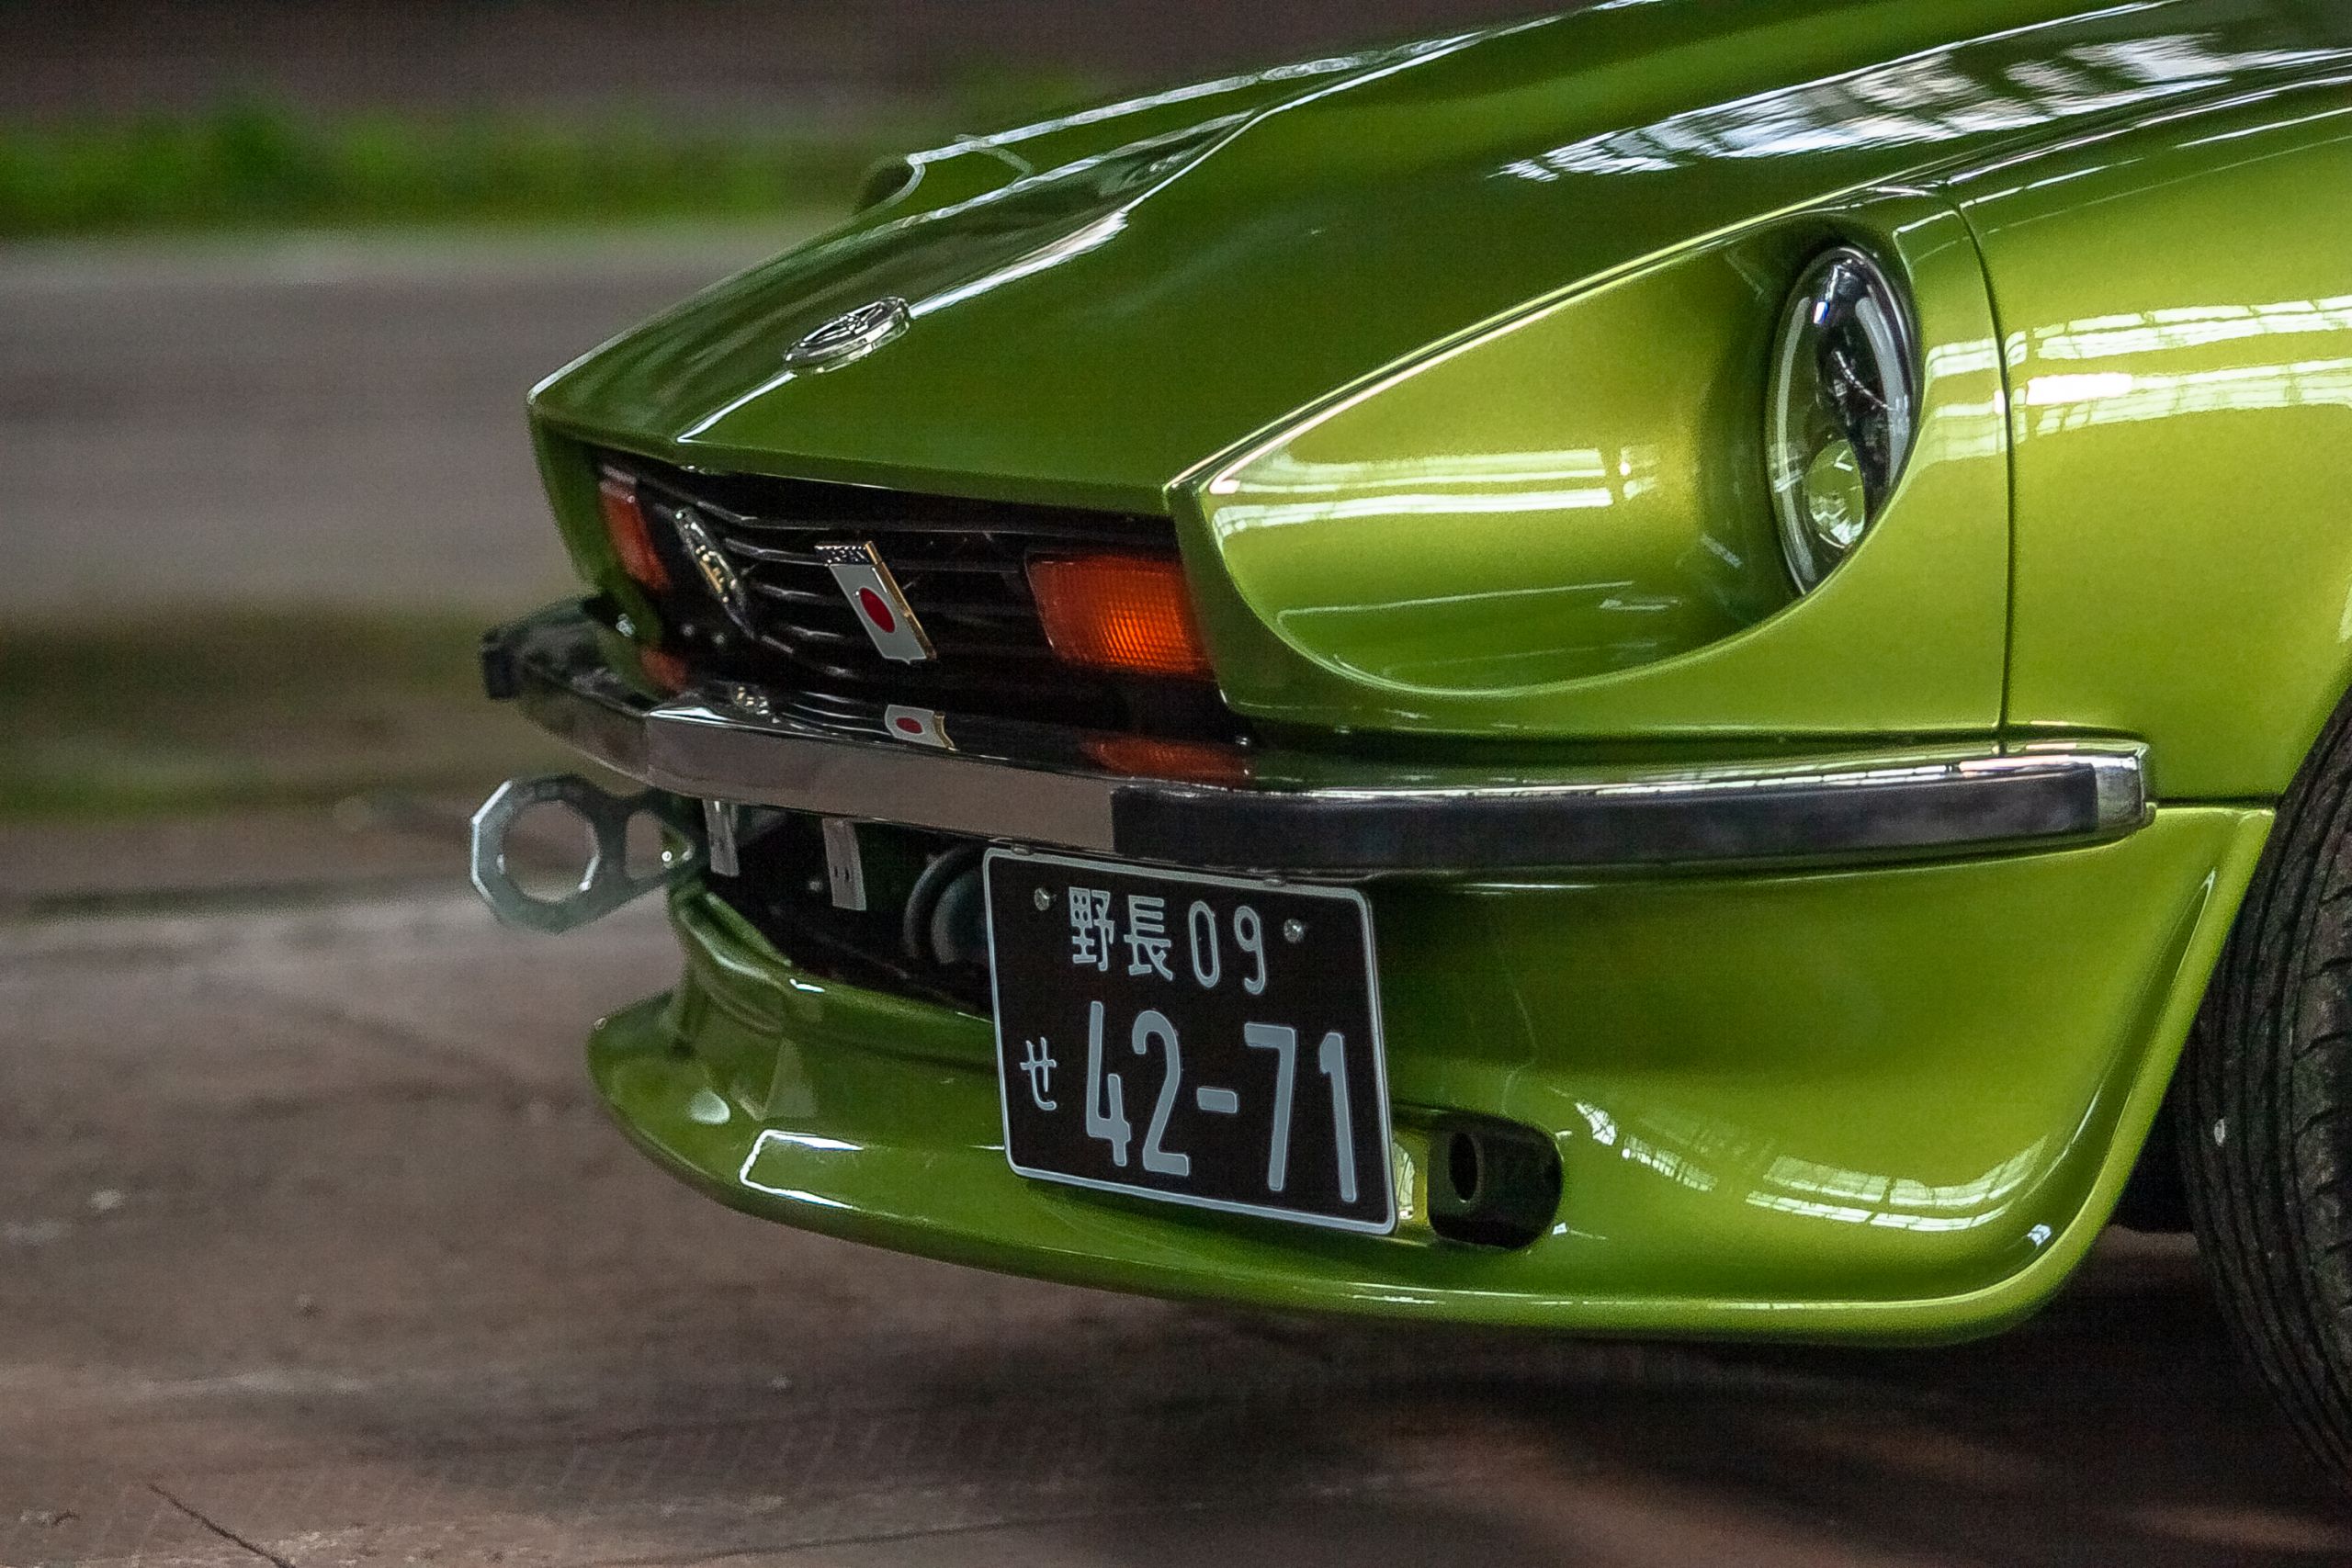 Fully restored 1976 DATSUN 280Z AVOCADO GREEN for sale with new chrome front bumper